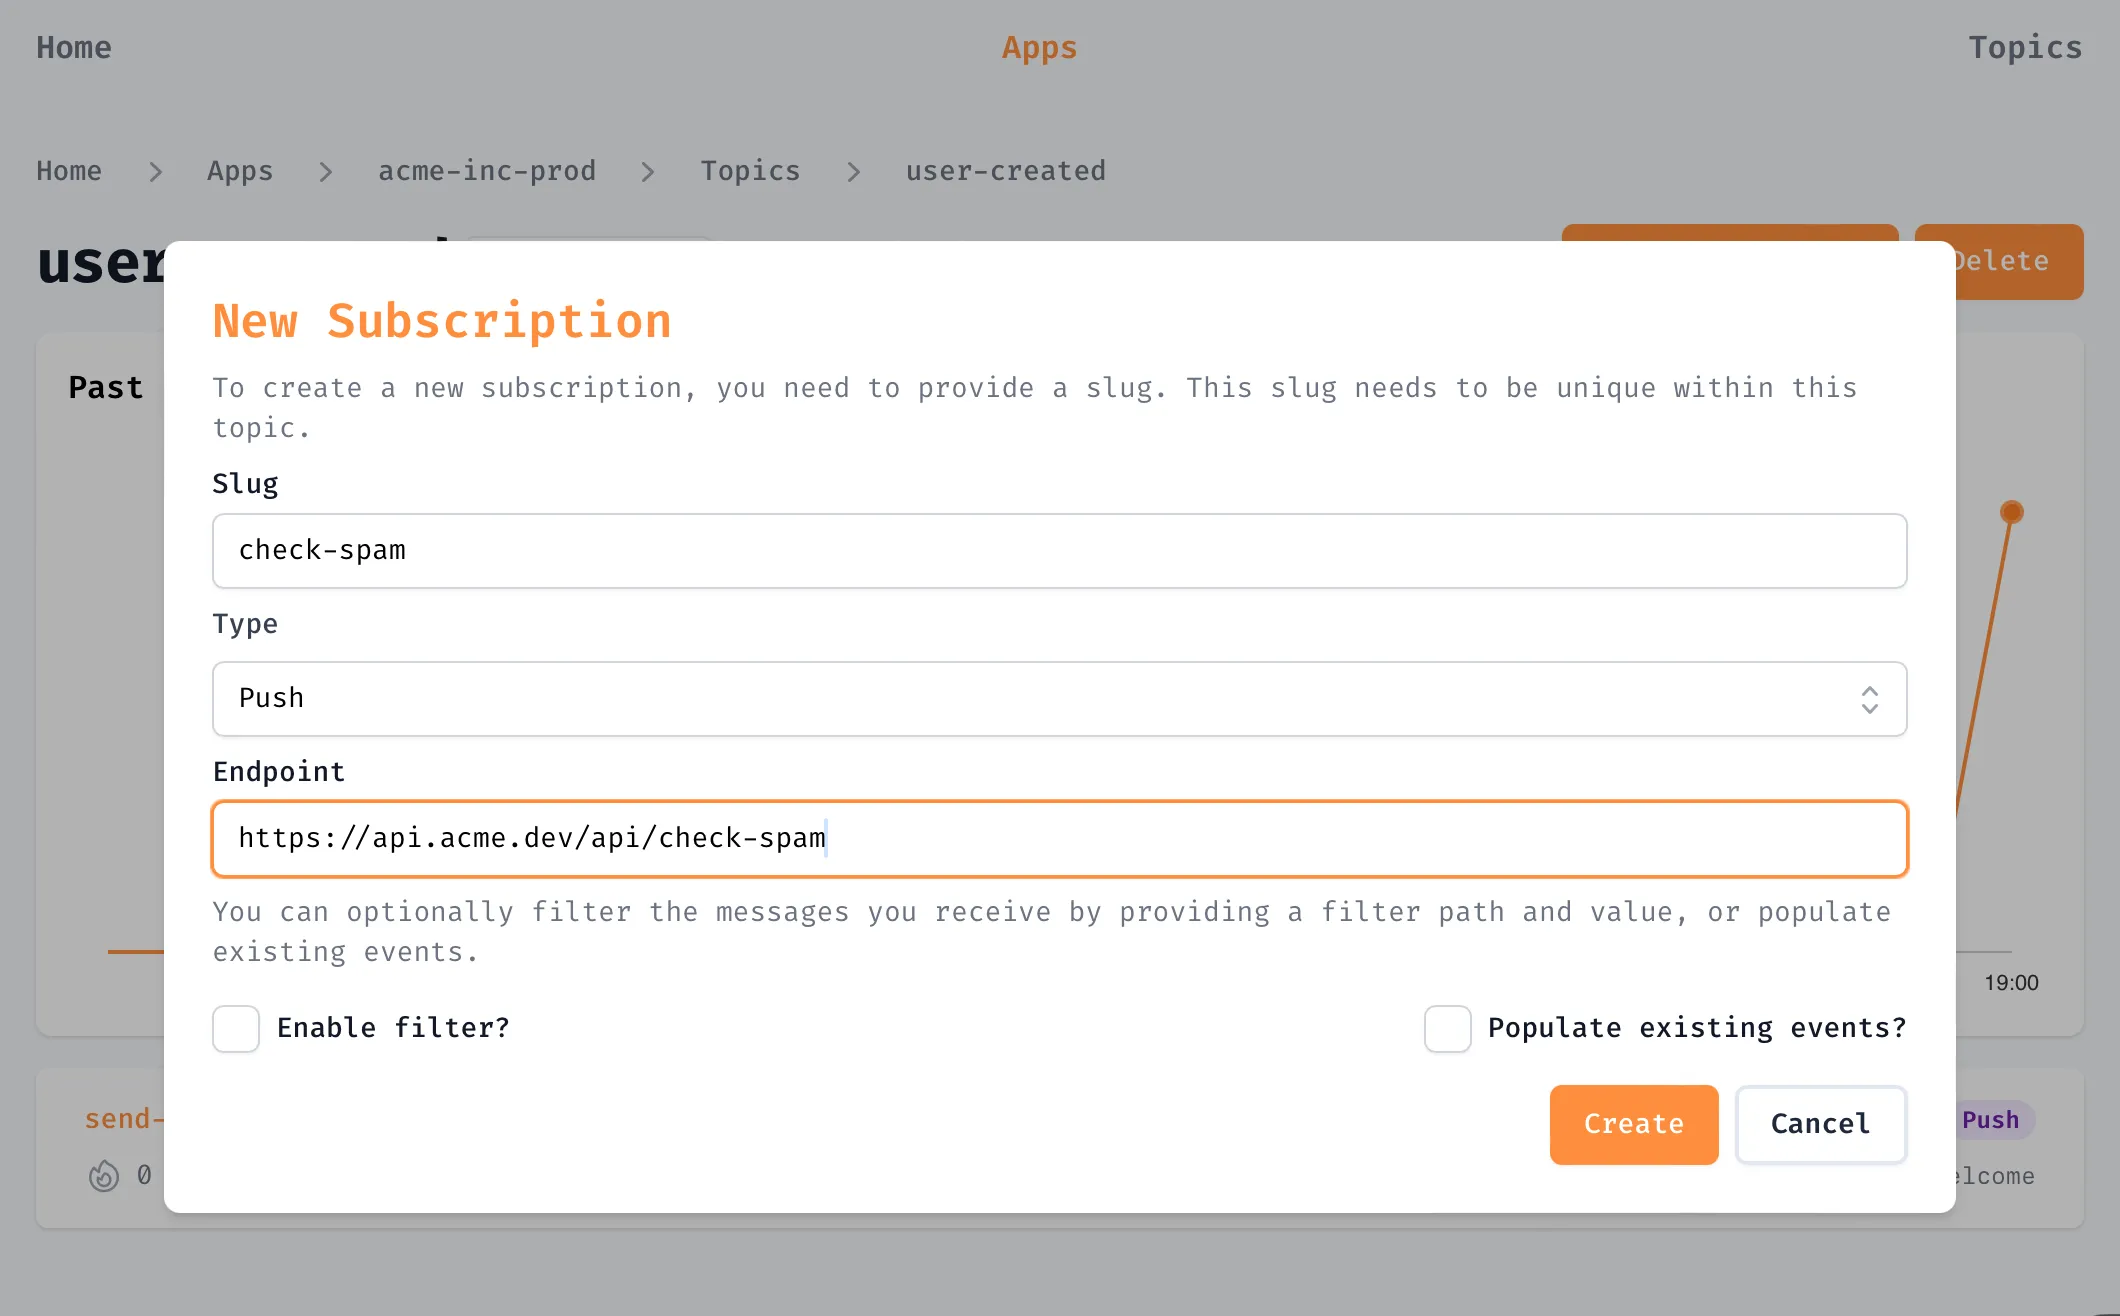 A screenshot of the new subscription form in the Sailhouse dashboard, setting up a new spam-checking push subscription